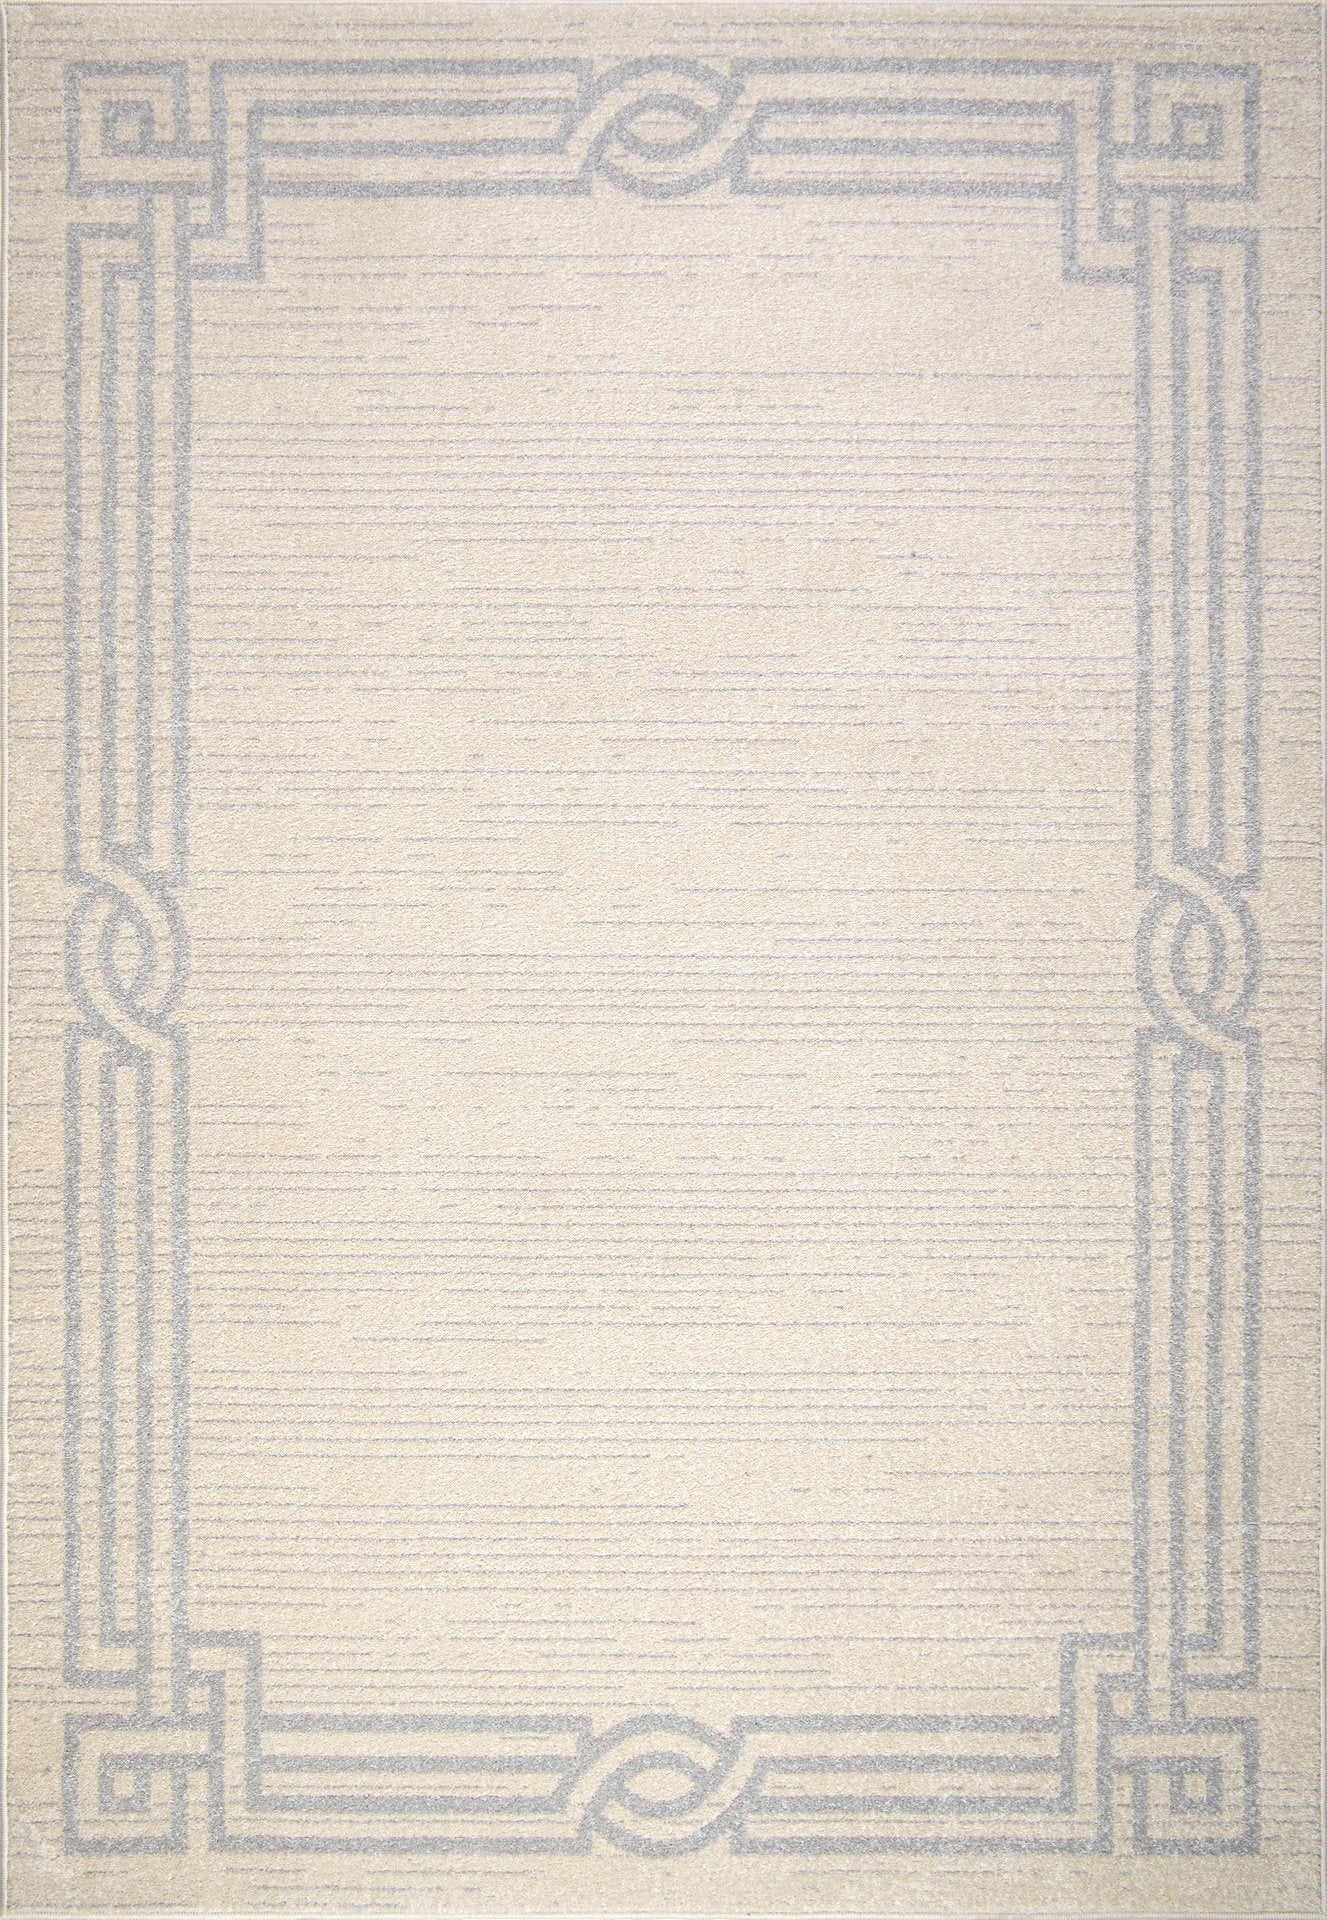 modern ivory grey bordered area rug 2x5, 3x5 Runner Rug, Entry Way, Entrance, Balcony, Bedside, Home Office, Table Top